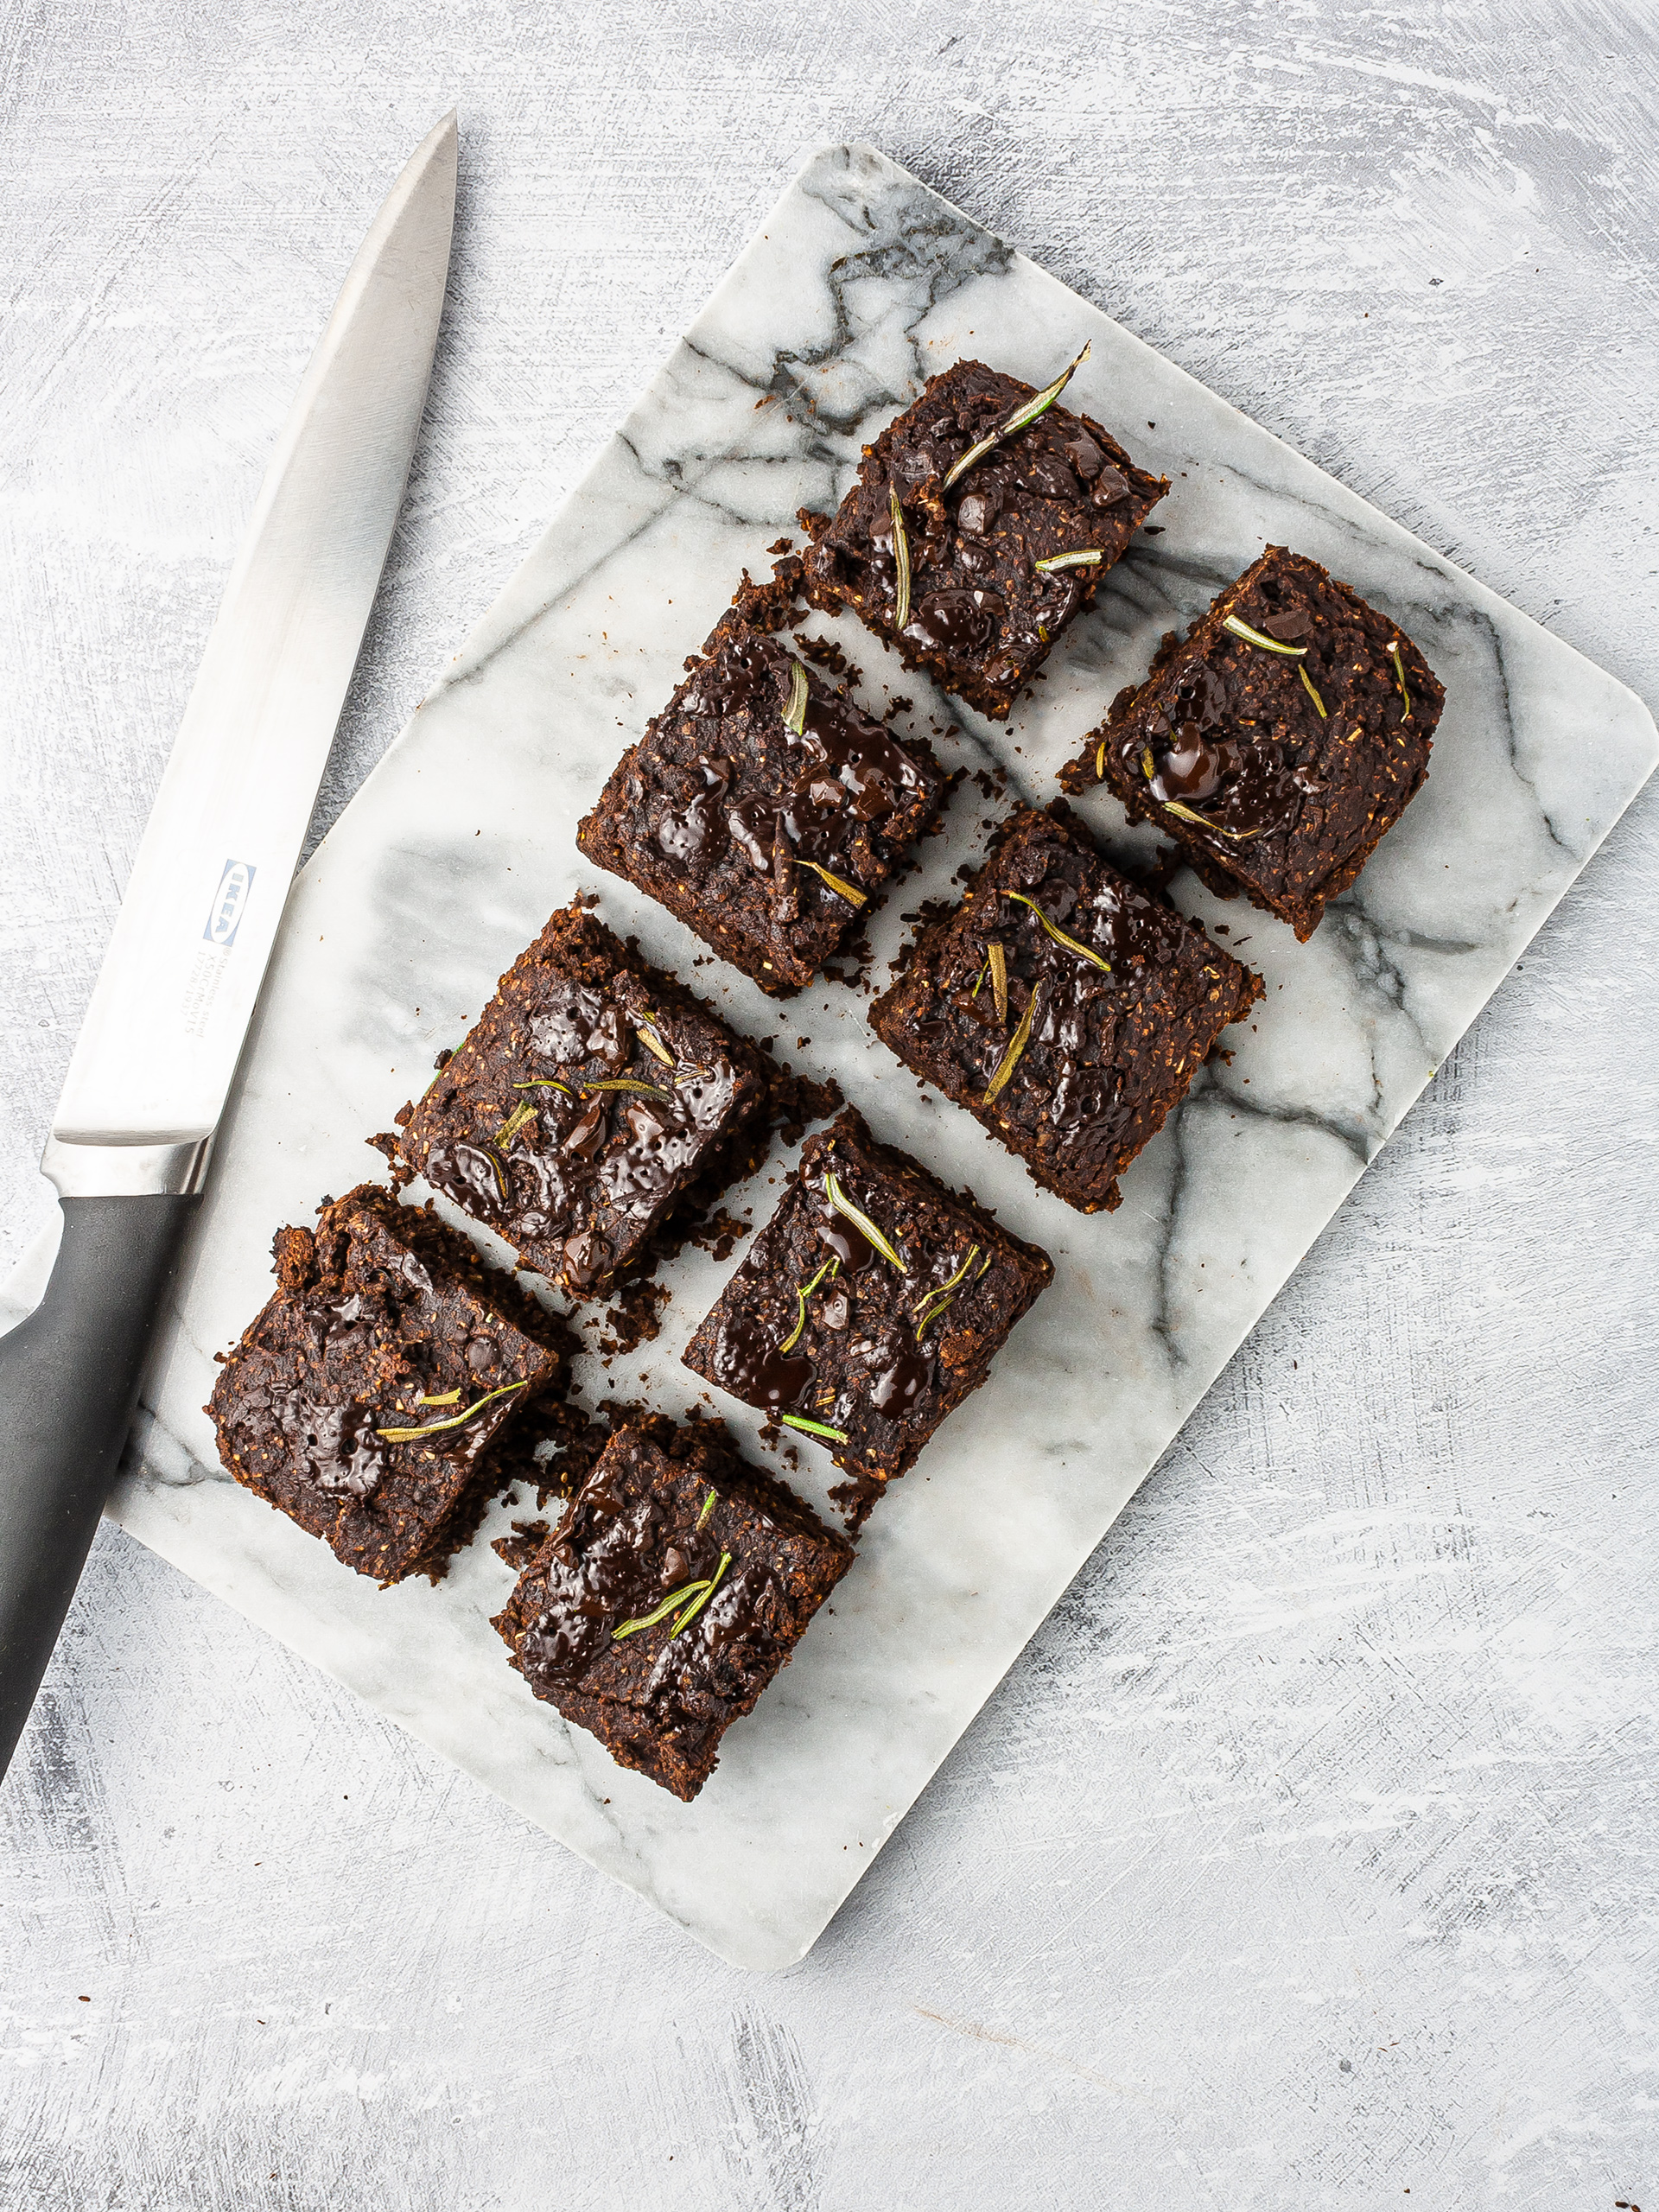 Brownies sliced into squares.